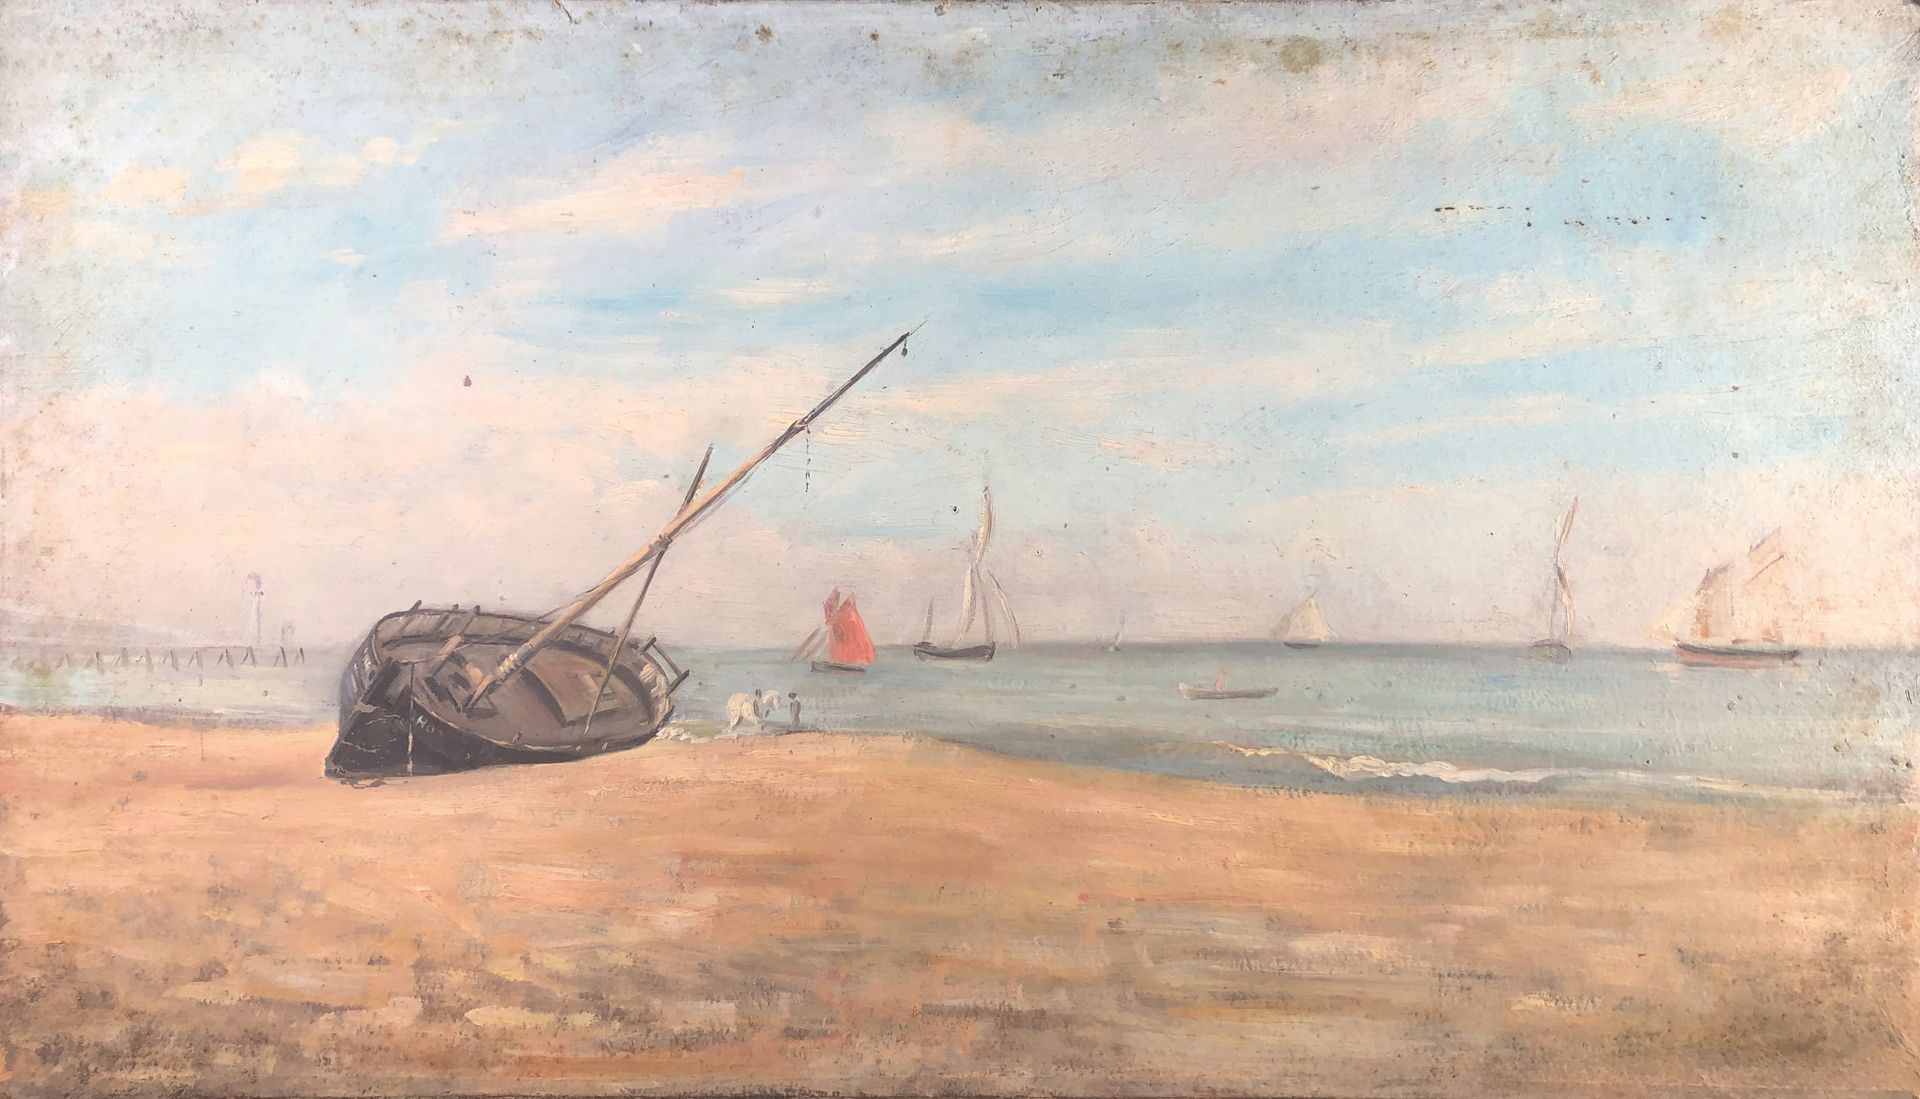 Null Paul HUET (1803-1869)

On the beach at Trouville.

Oil on strong paper. Wor&hellip;